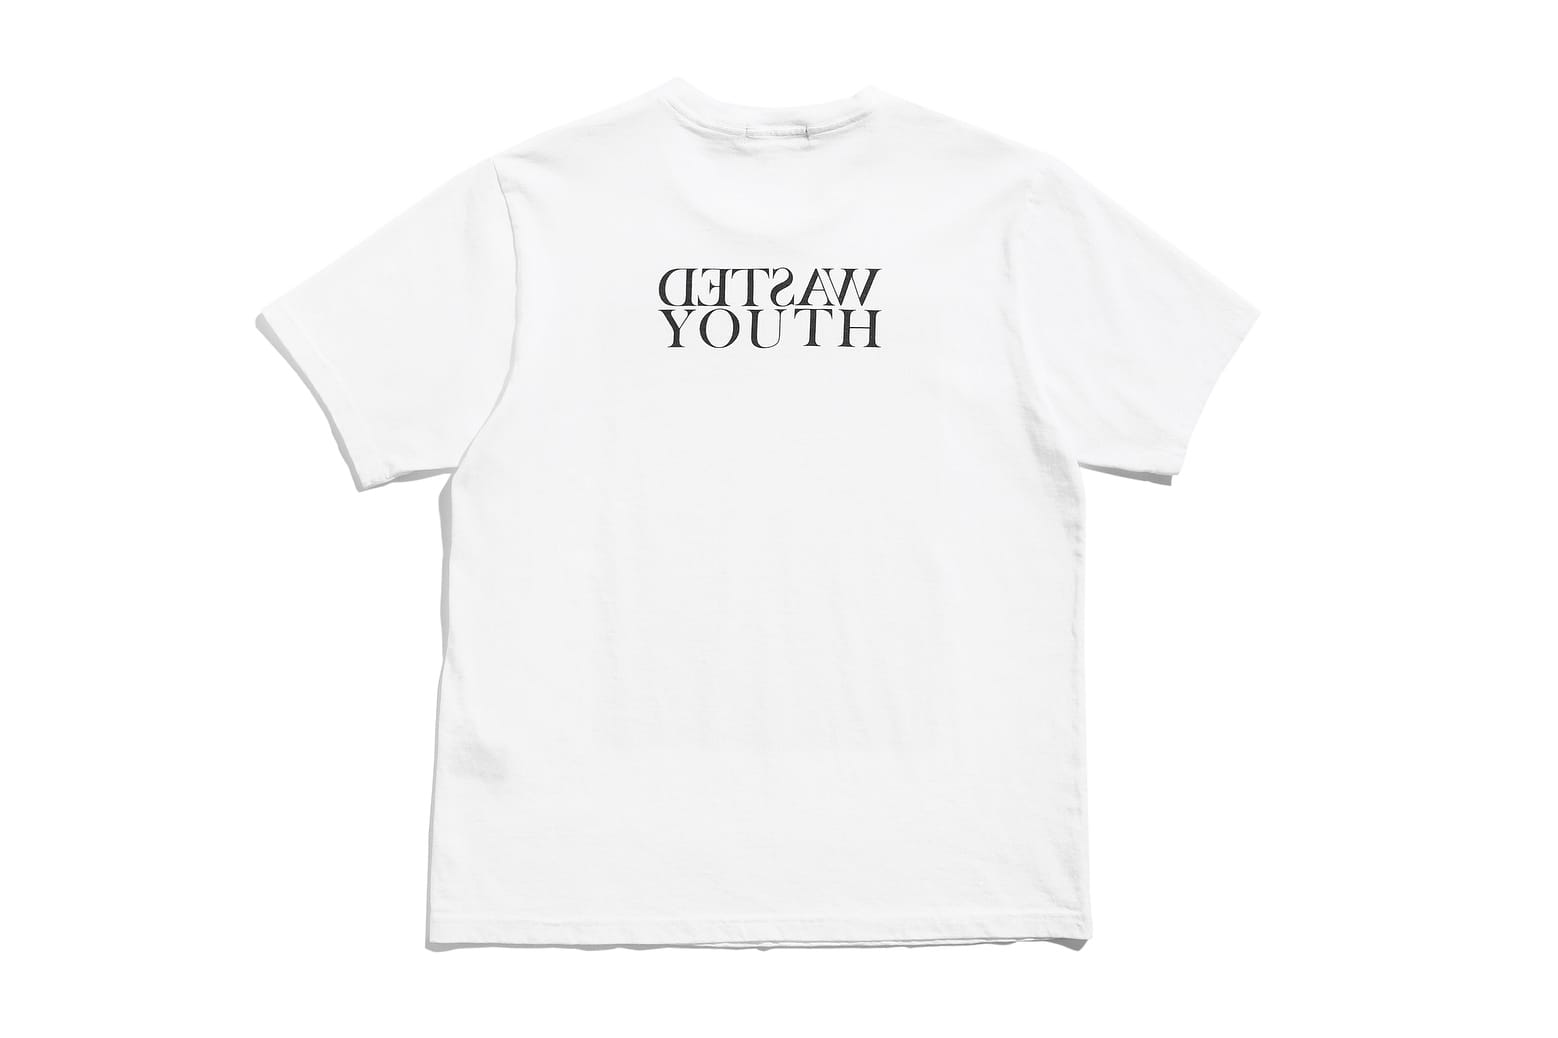 VERDY の Wasted Youth x UNDERCOVER から新作アイテムがリリース ...